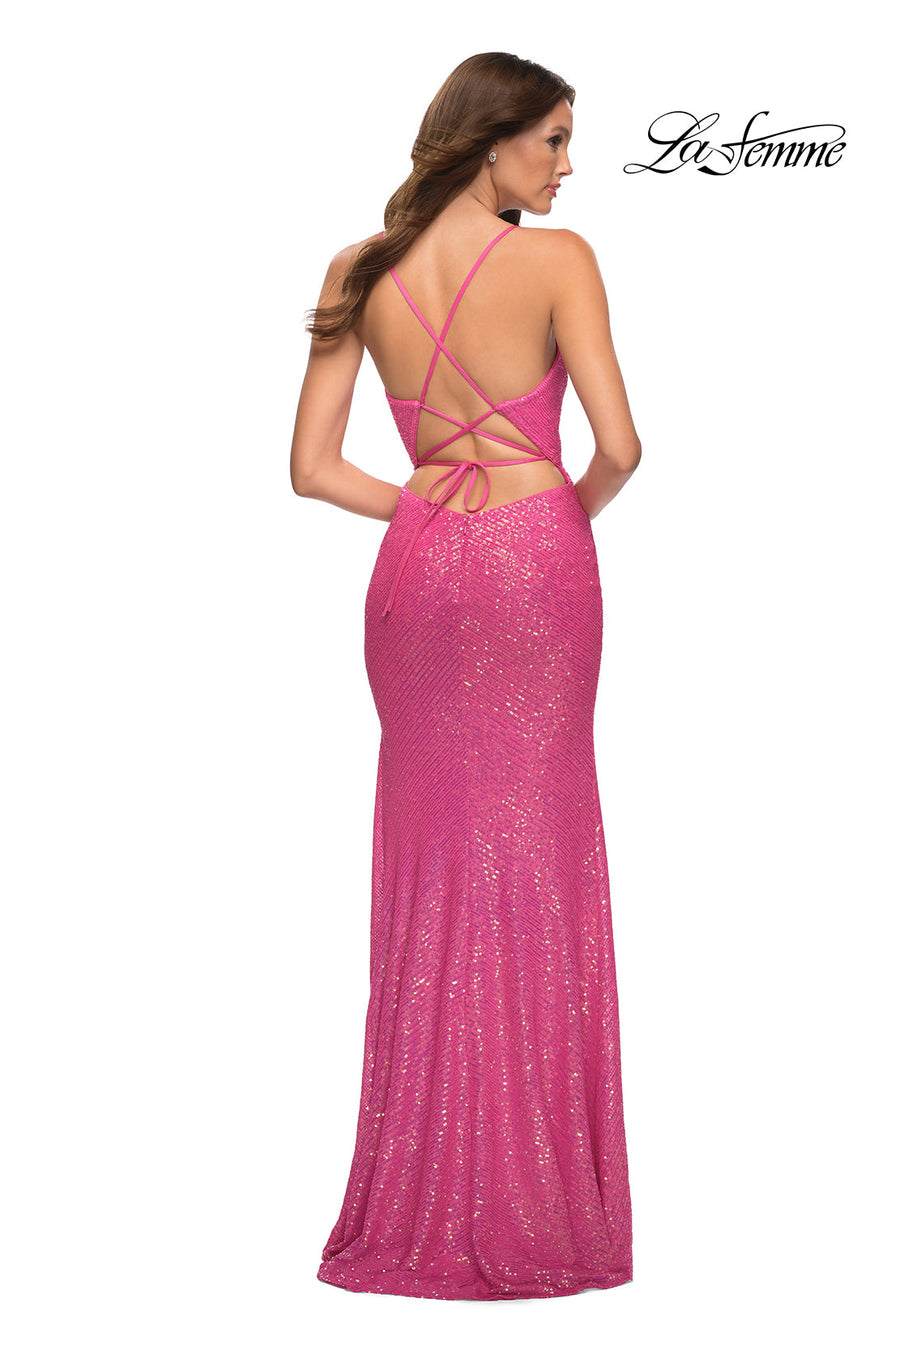 La Femme 30607 prom dress images.  La Femme 30607 is available in these colors: Hot Pink.